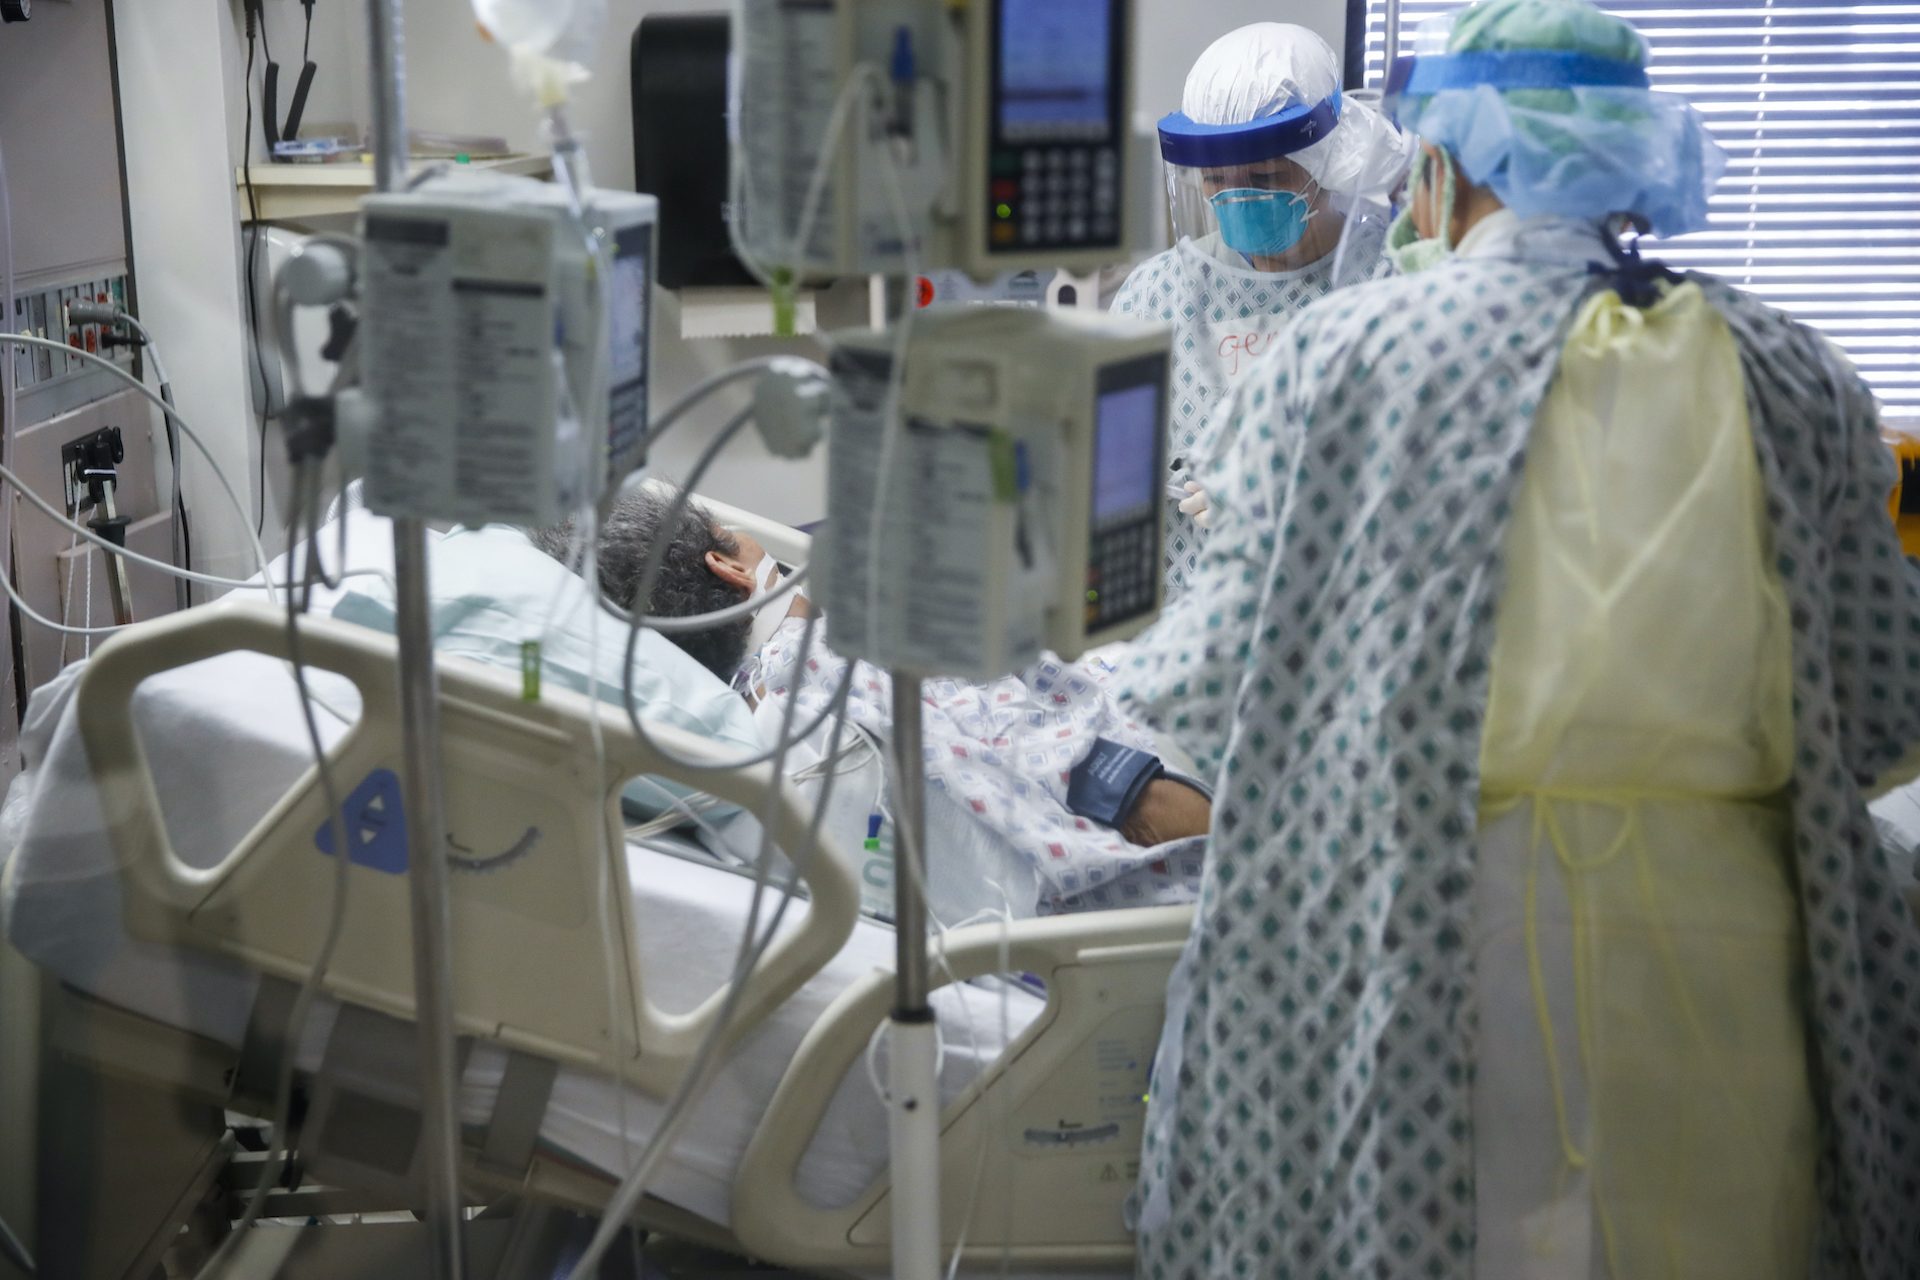 Intensive care unit staff members care for a COVID-19 patient, Monday, April 20, 2020, at St. Joseph's Hospital in Yonkers, N.Y.